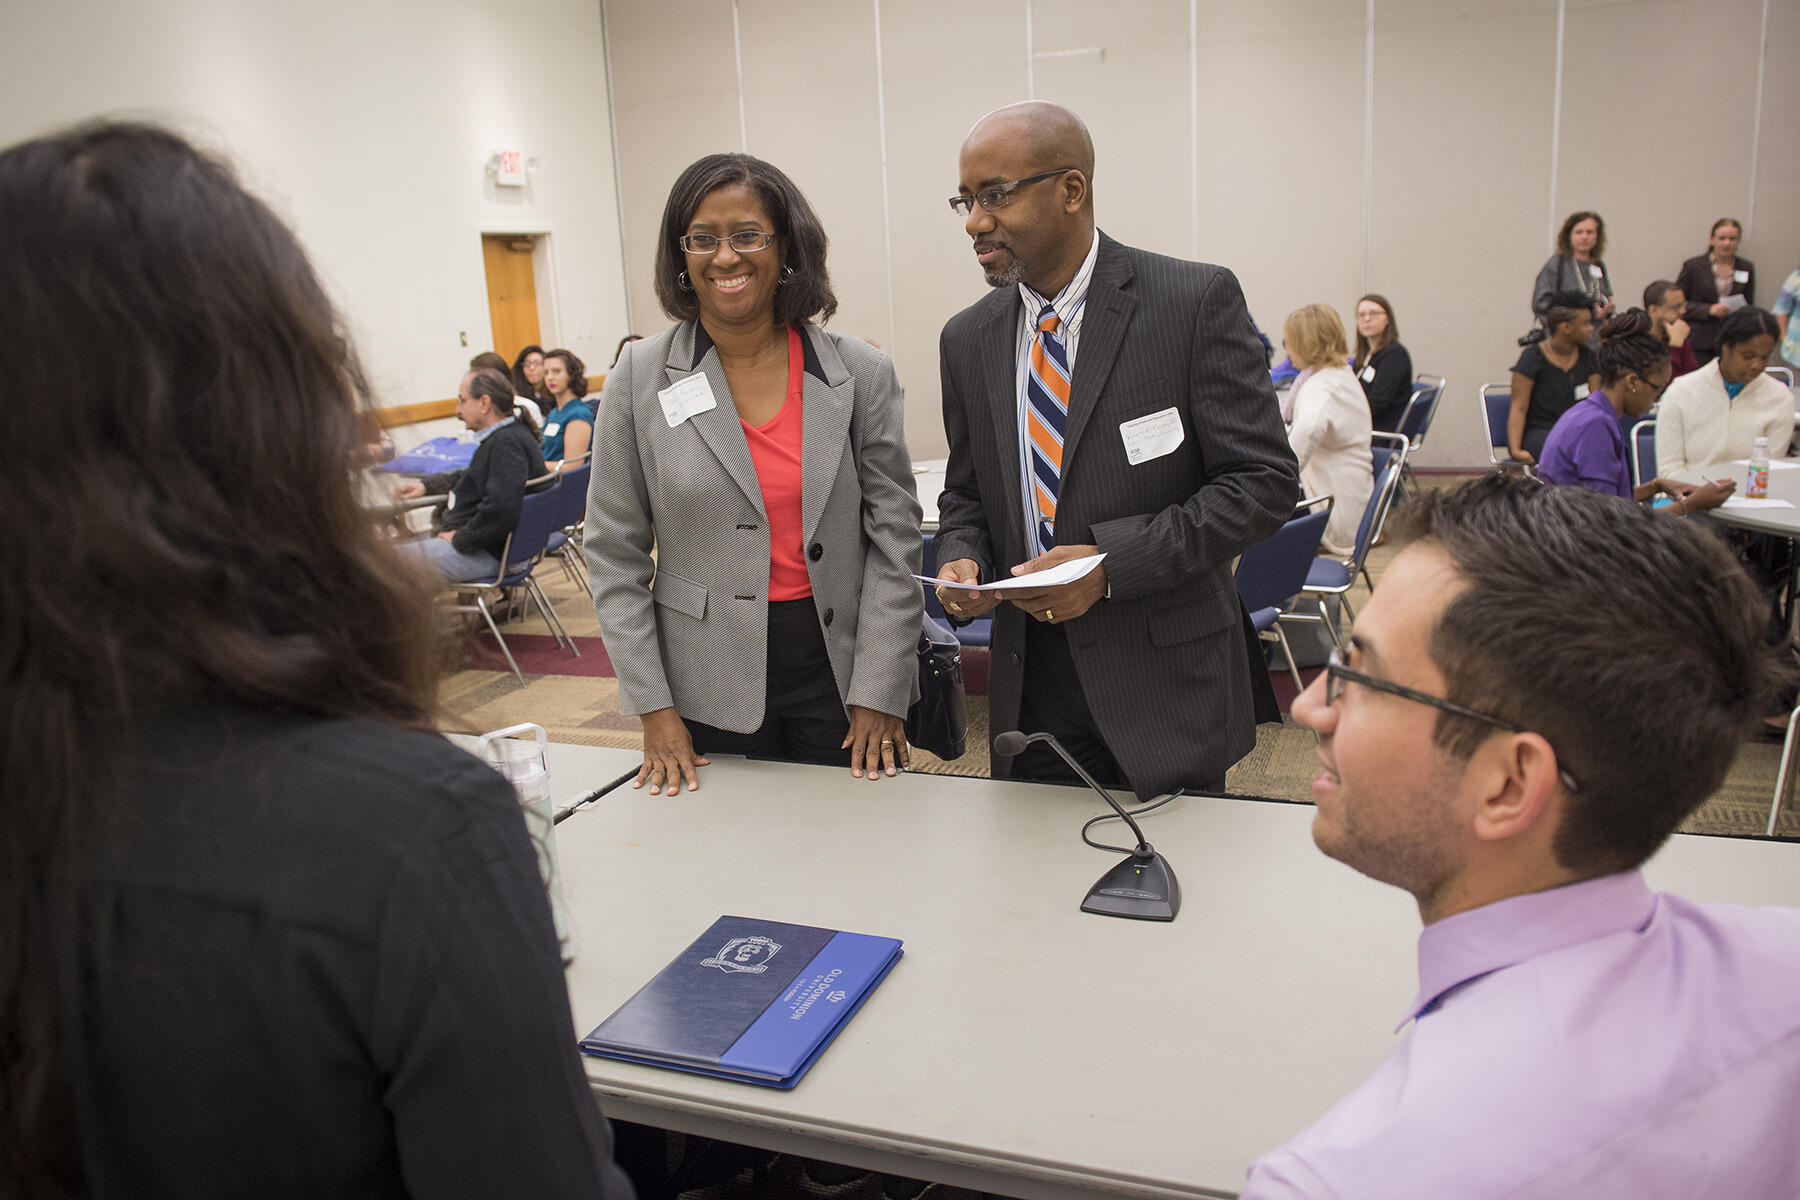 Graduate student and faculty panels were held during Commonwealth Graduate Education Day